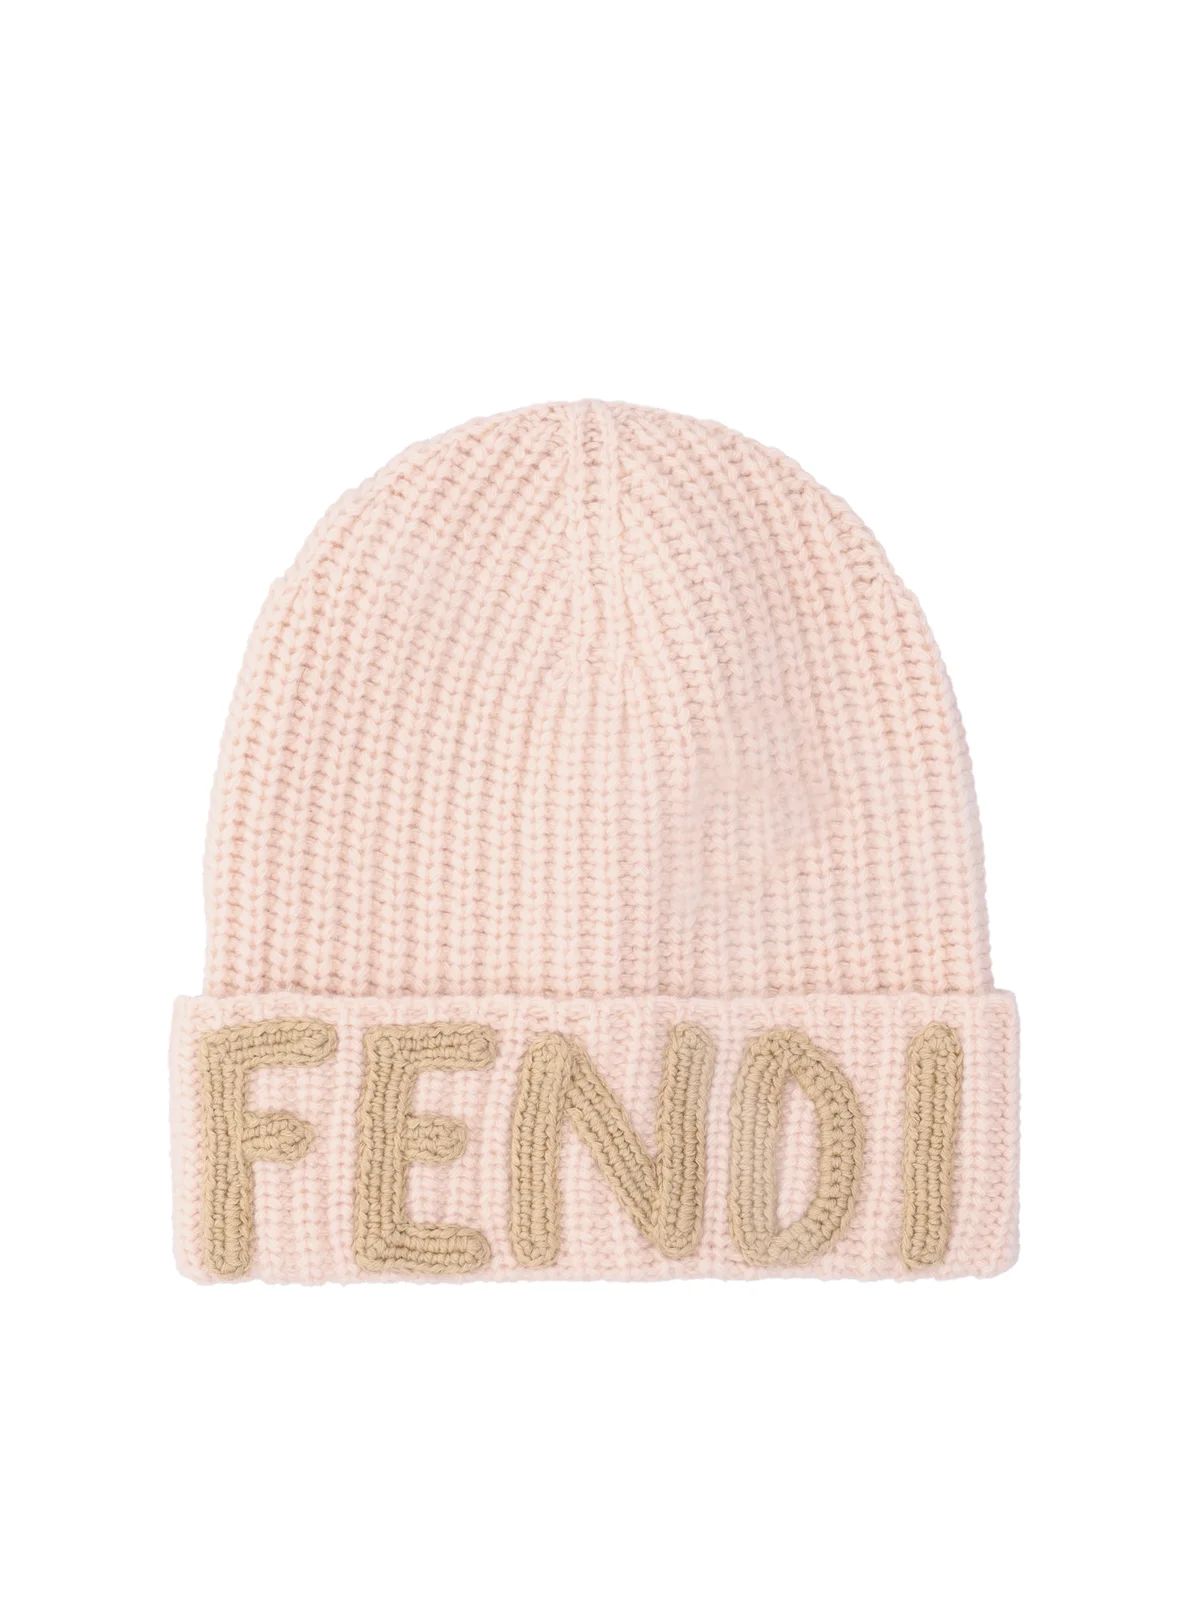 Fendi Logo Embroidered Ribbed Knit Beanie | Cettire Global